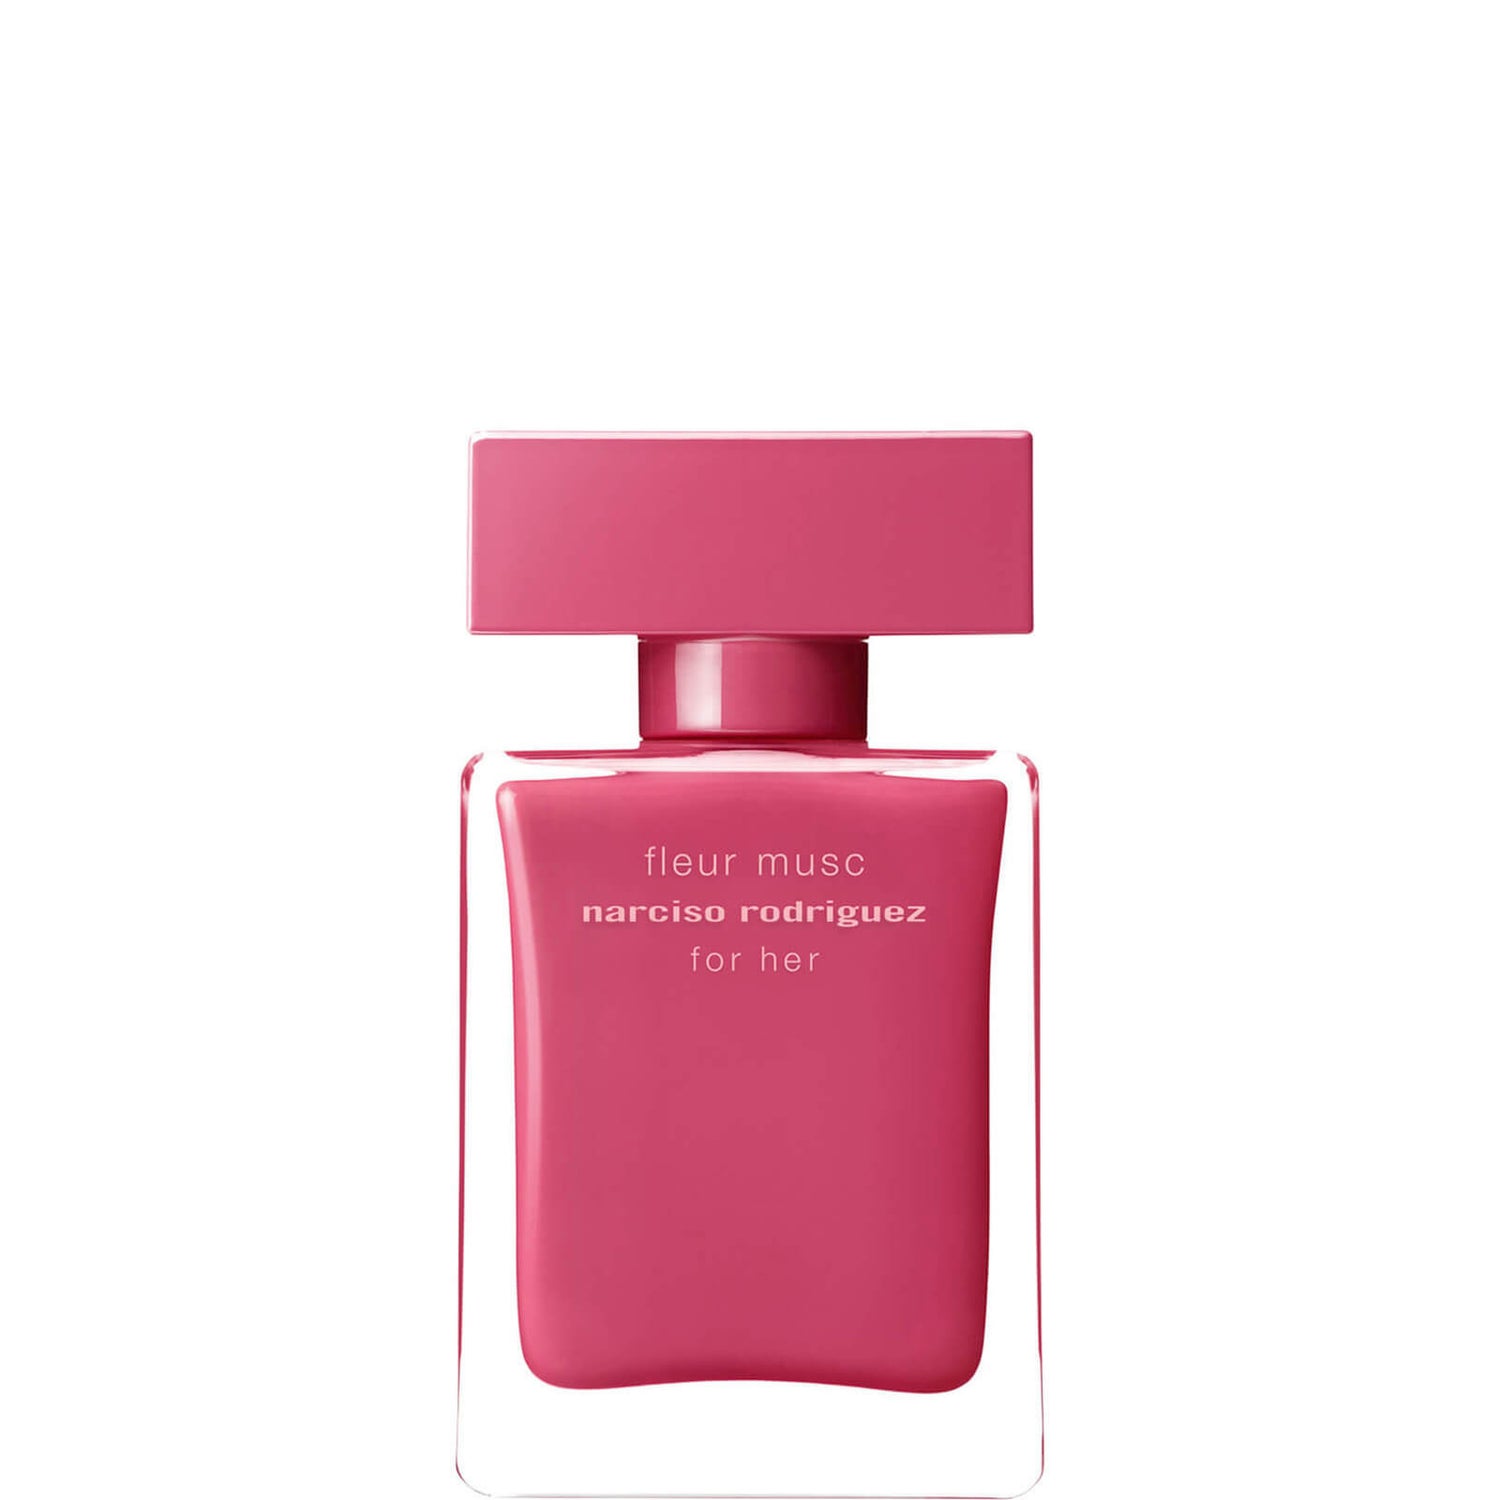 Narciso Rodriguez fleur Musc for her, 100 ml. Narciso Rodriguez fleur Musc for her 20мл. Narciso Rodriguez for her fleur Musc EDP 50ml. Духи fleur Musc Narciso Rodriguez for her. Родригес флер